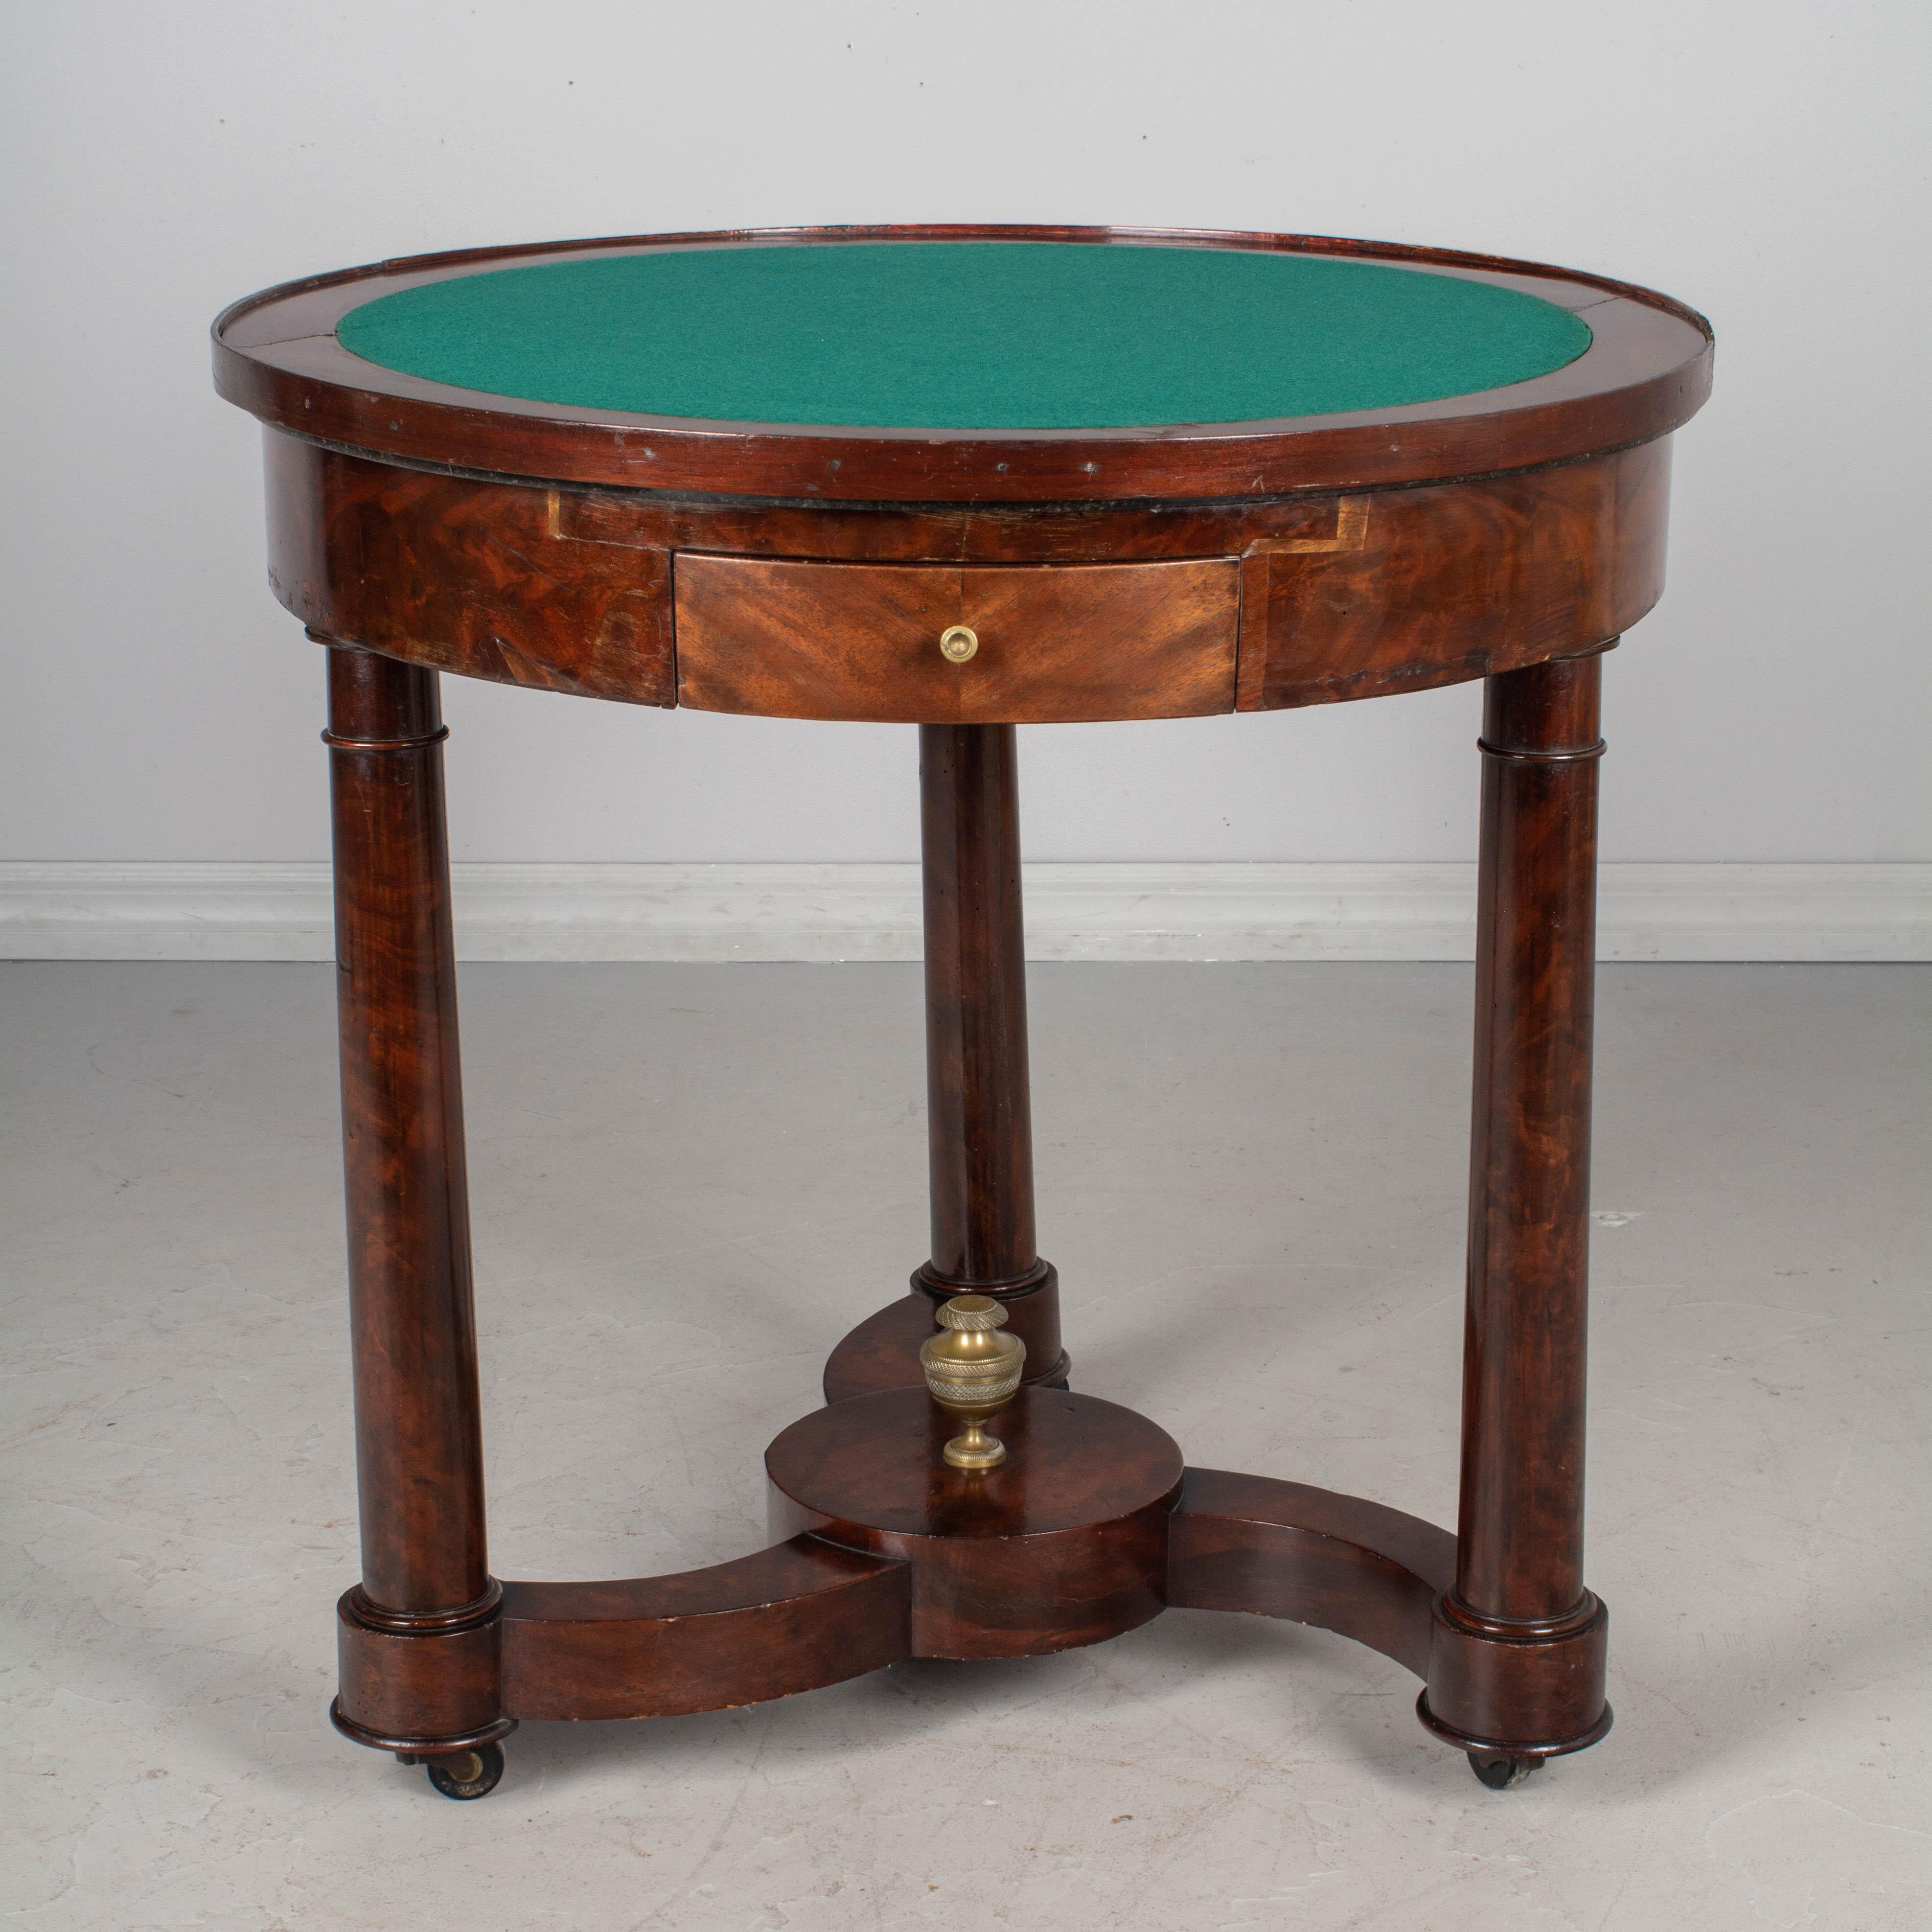 A 19th century French Empire Period mahogany gueridon, or game table, with Grey St. Anne marble top. A versatile table with removeable top, one side with green felt and the other with black leather. Veneer of mahogany banding around the top.